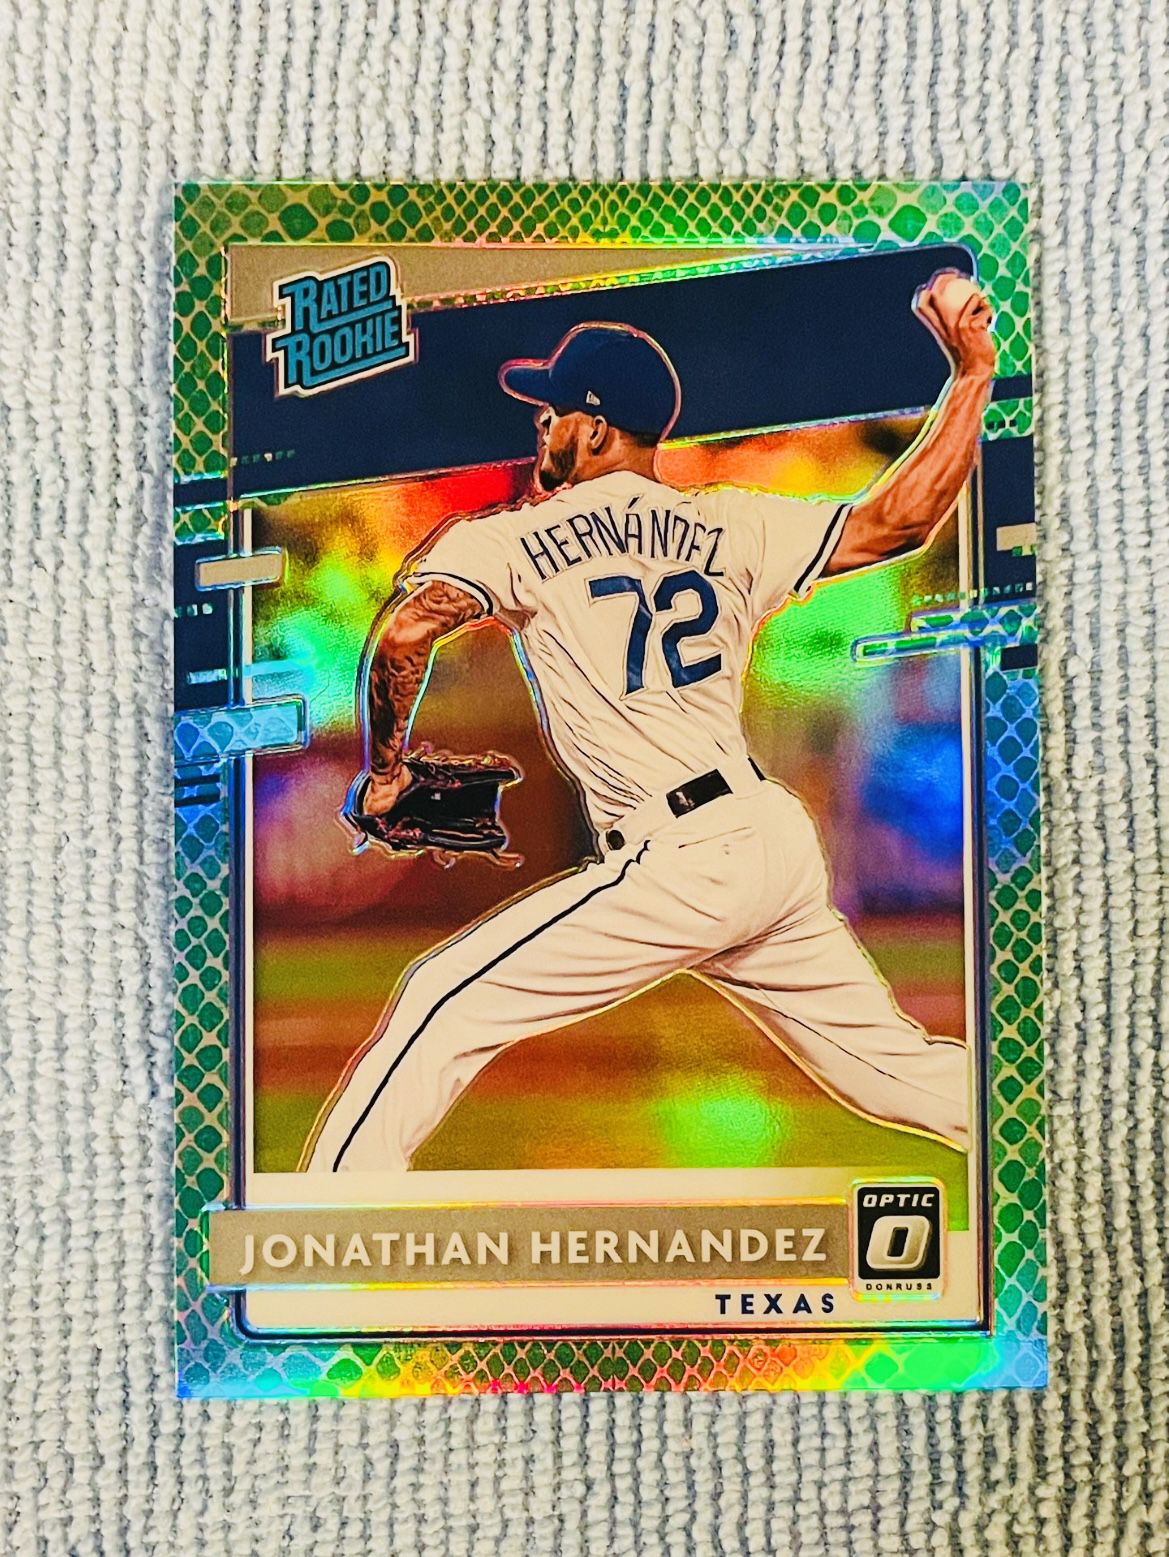 Jonathan Hernandez Texas Rangers 2020 Panini Donruss Optic Choice Rated  Rookie Green Dragon Prizm /84 SSP for Sale in Federal Way, WA - OfferUp